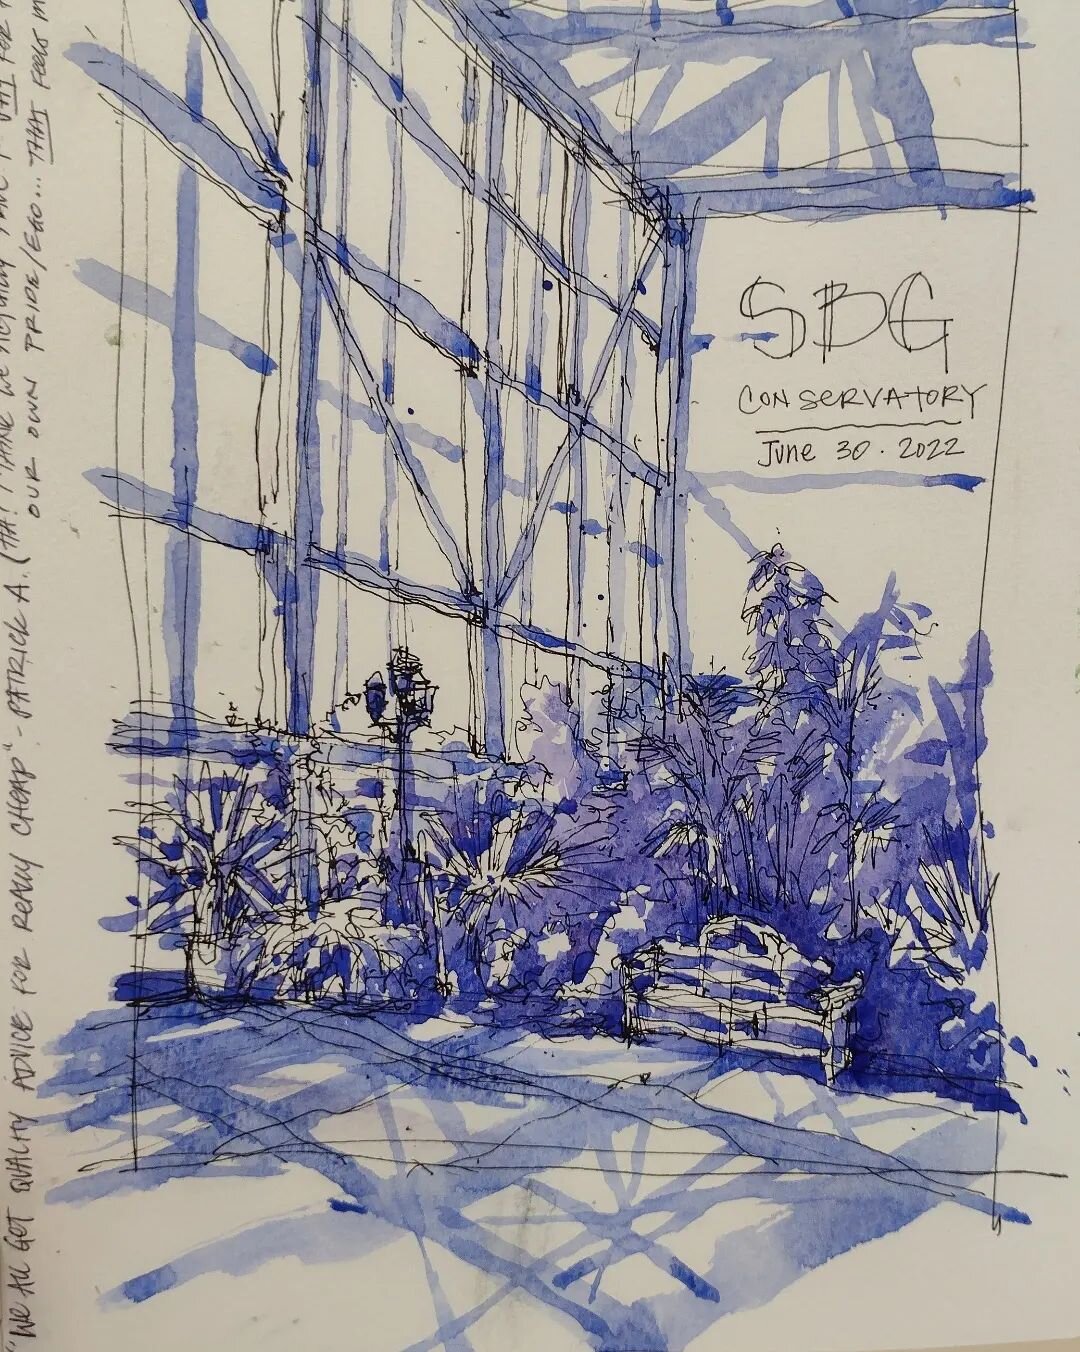 Took a few minutes to sketch down the shadows at the SBG conservatory after taking down my show! Thanks for the great exhibit @botanicalgarden_ga !!!

#seriousartist #urbansketchers #watercolor